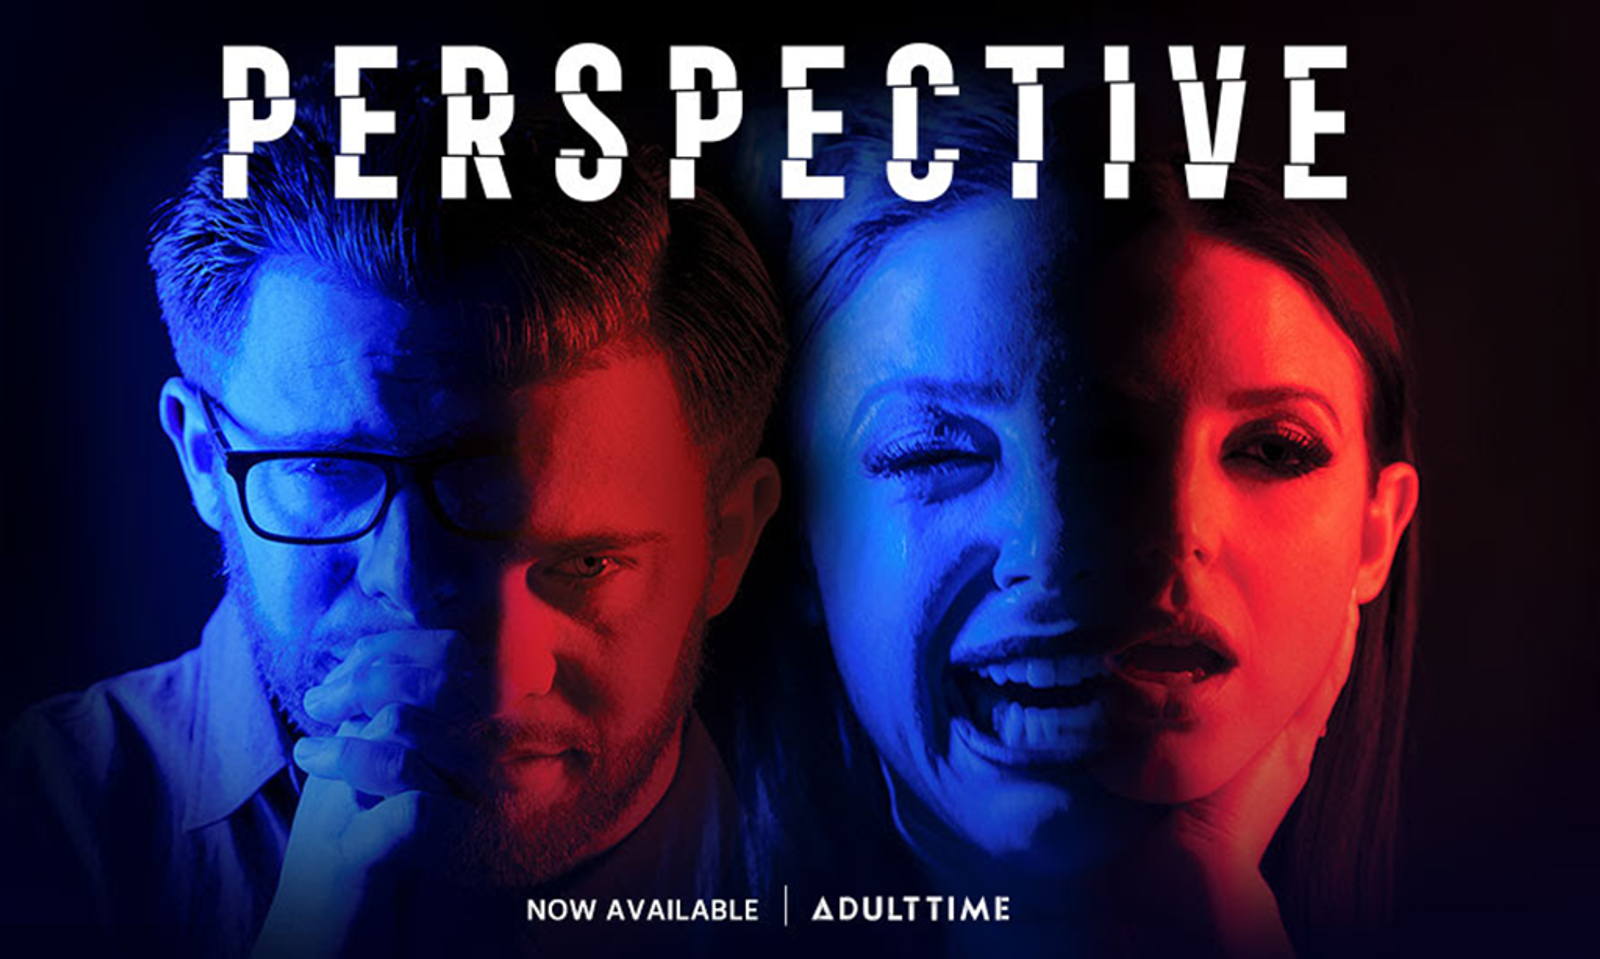 Seth Gamble Role in Adult Time’s 'Perspective' Gets Rave Reviews